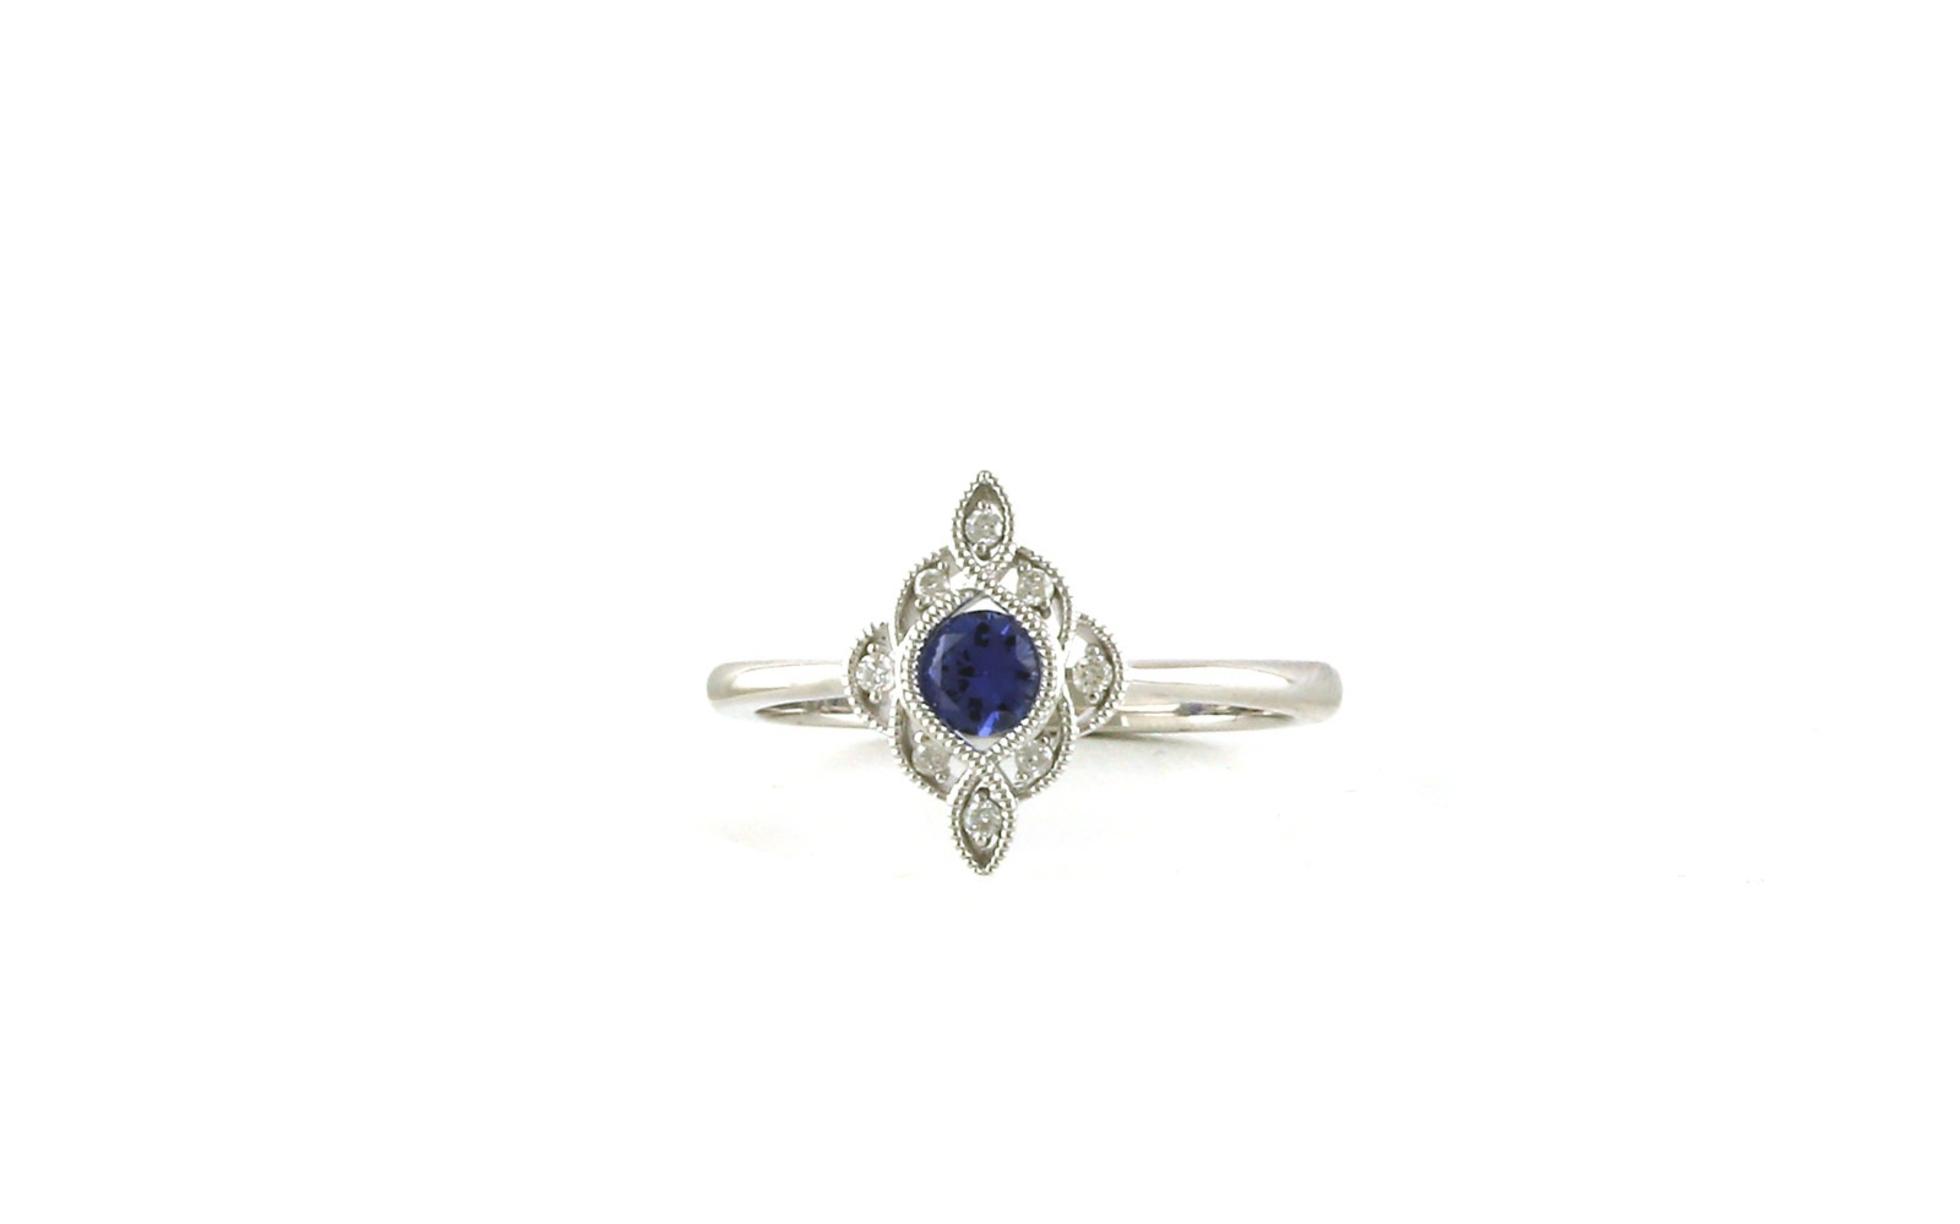 Vintage Halo-style Montana Yogo Sapphire and Diamond Ring with Milgrain Details in White Gold (0.40cts TWT)